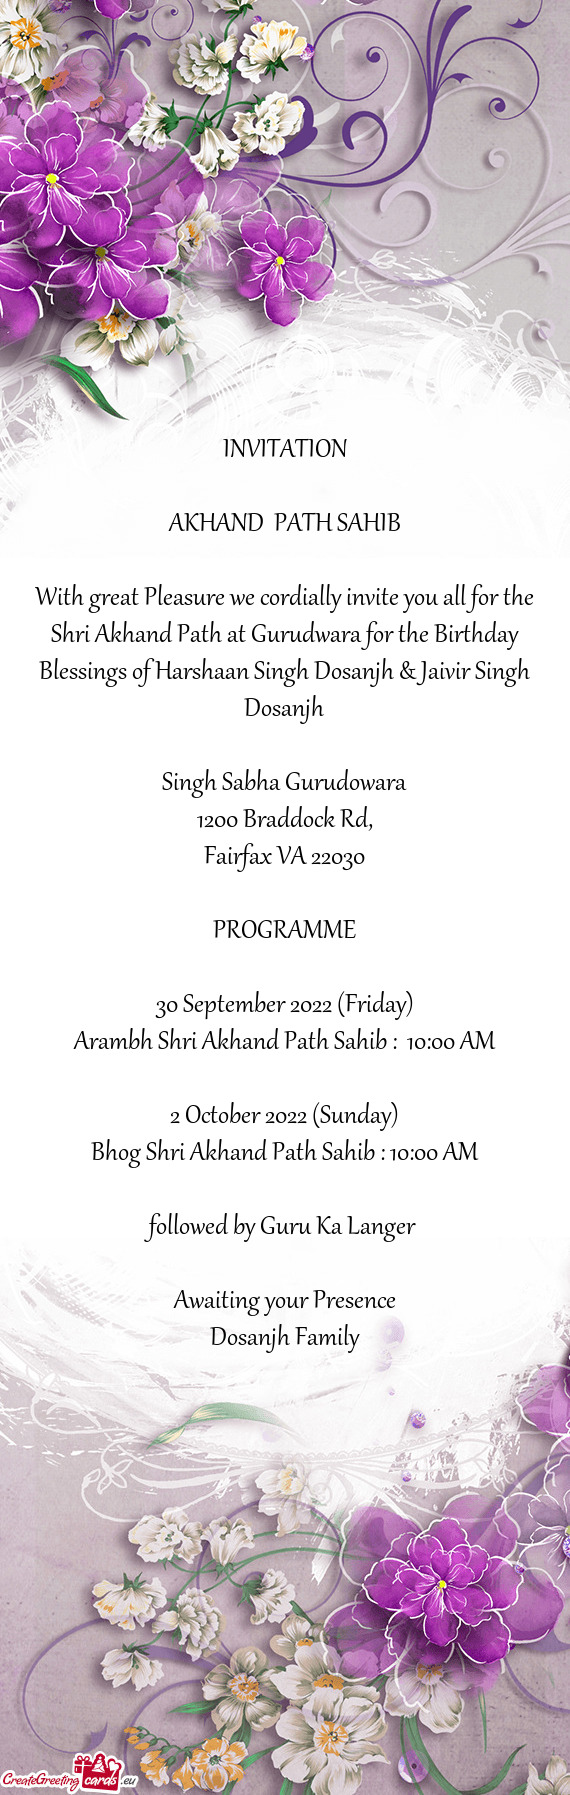 With great Pleasure we cordially invite you all for the Shri Akhand Path at Gurudwara for the Birthd